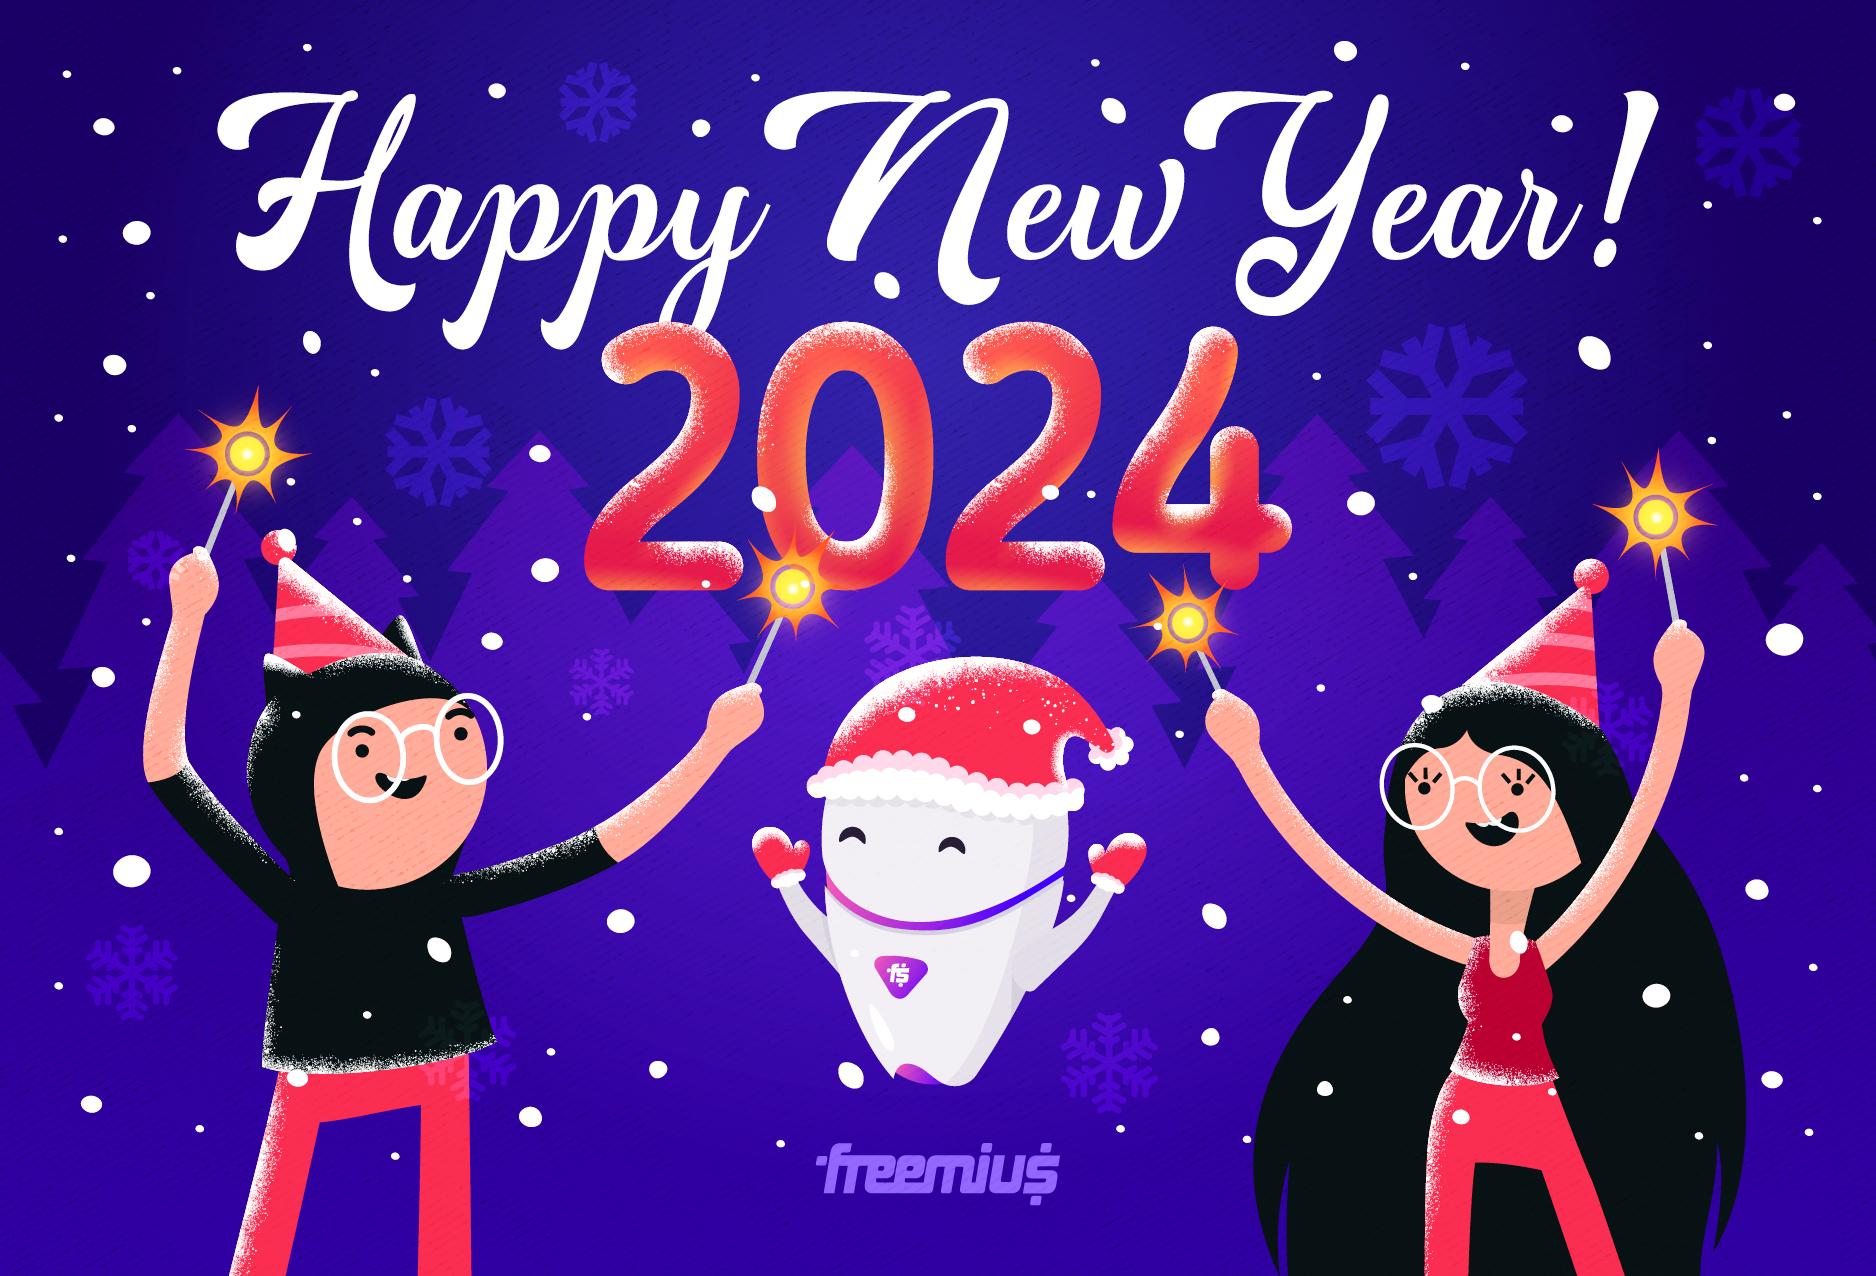 Happy New Year Greeting Card from Freemius